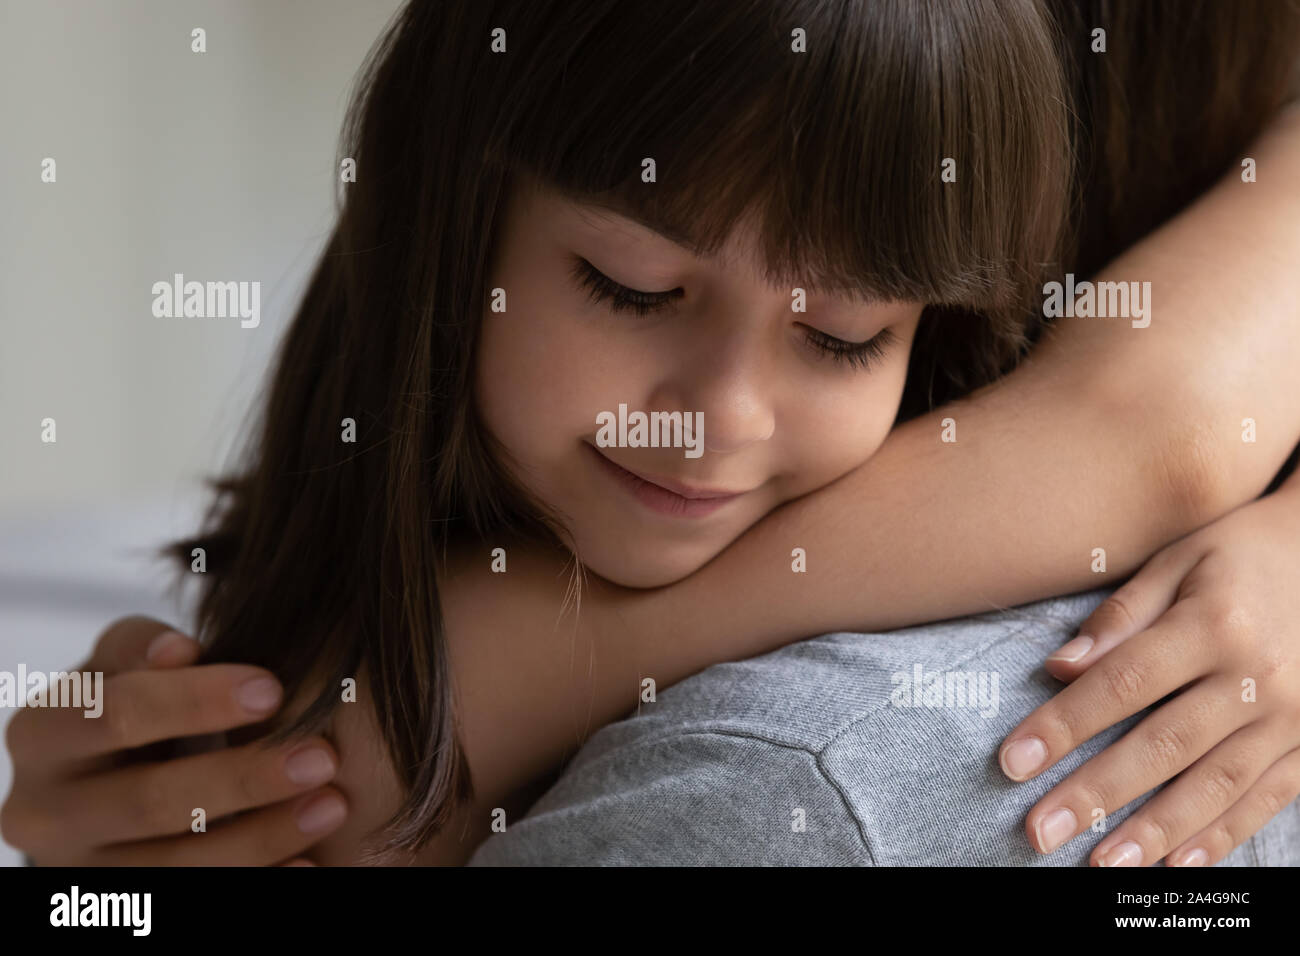 Smiling adorable little daughter enjoying tender family moment with mother. Stock Photo